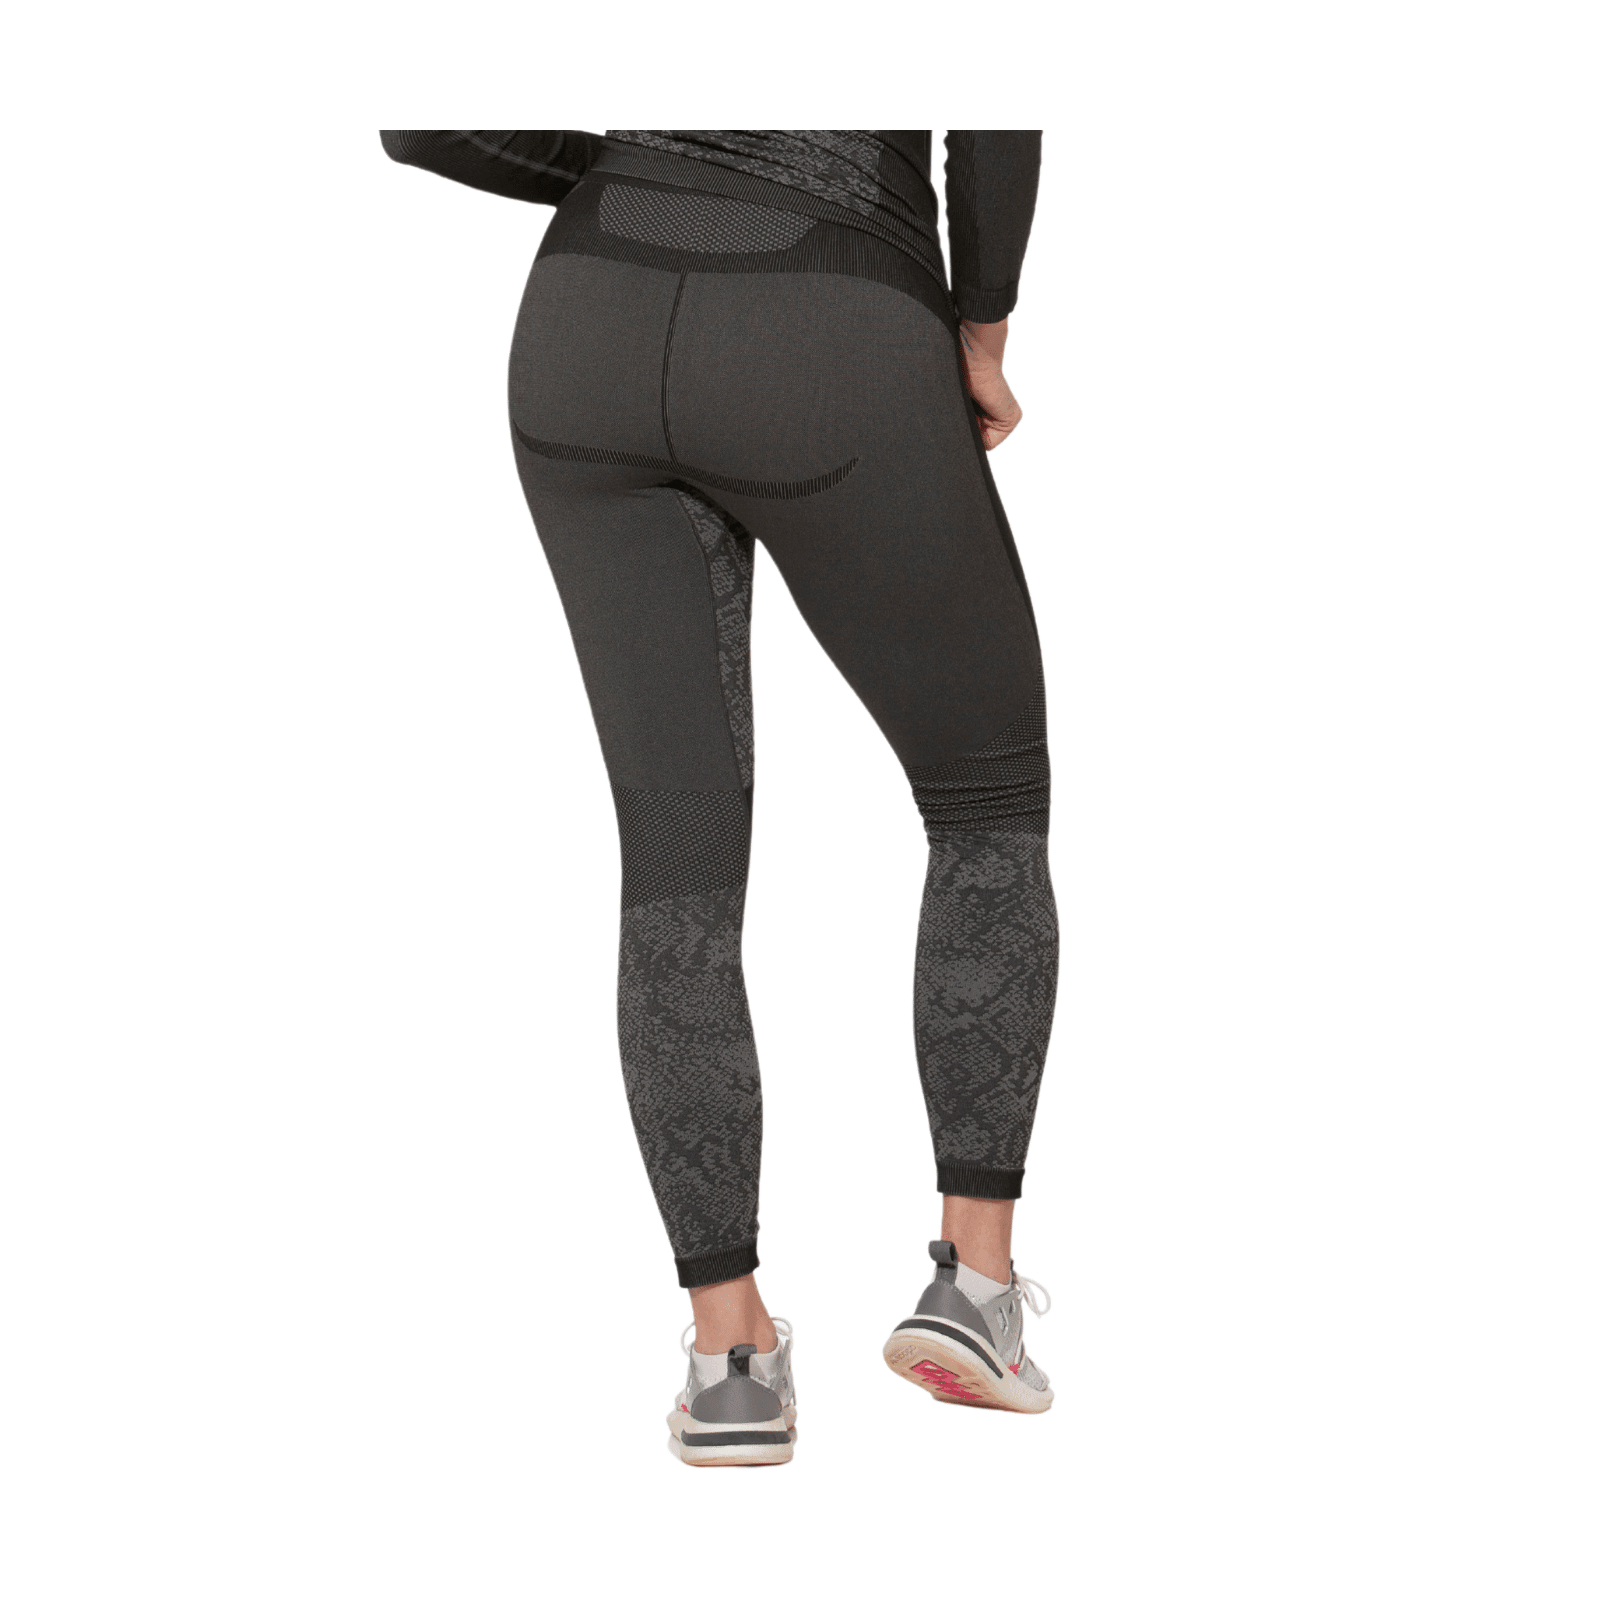 Base Layer Tights, Lyndale Sports Jersey